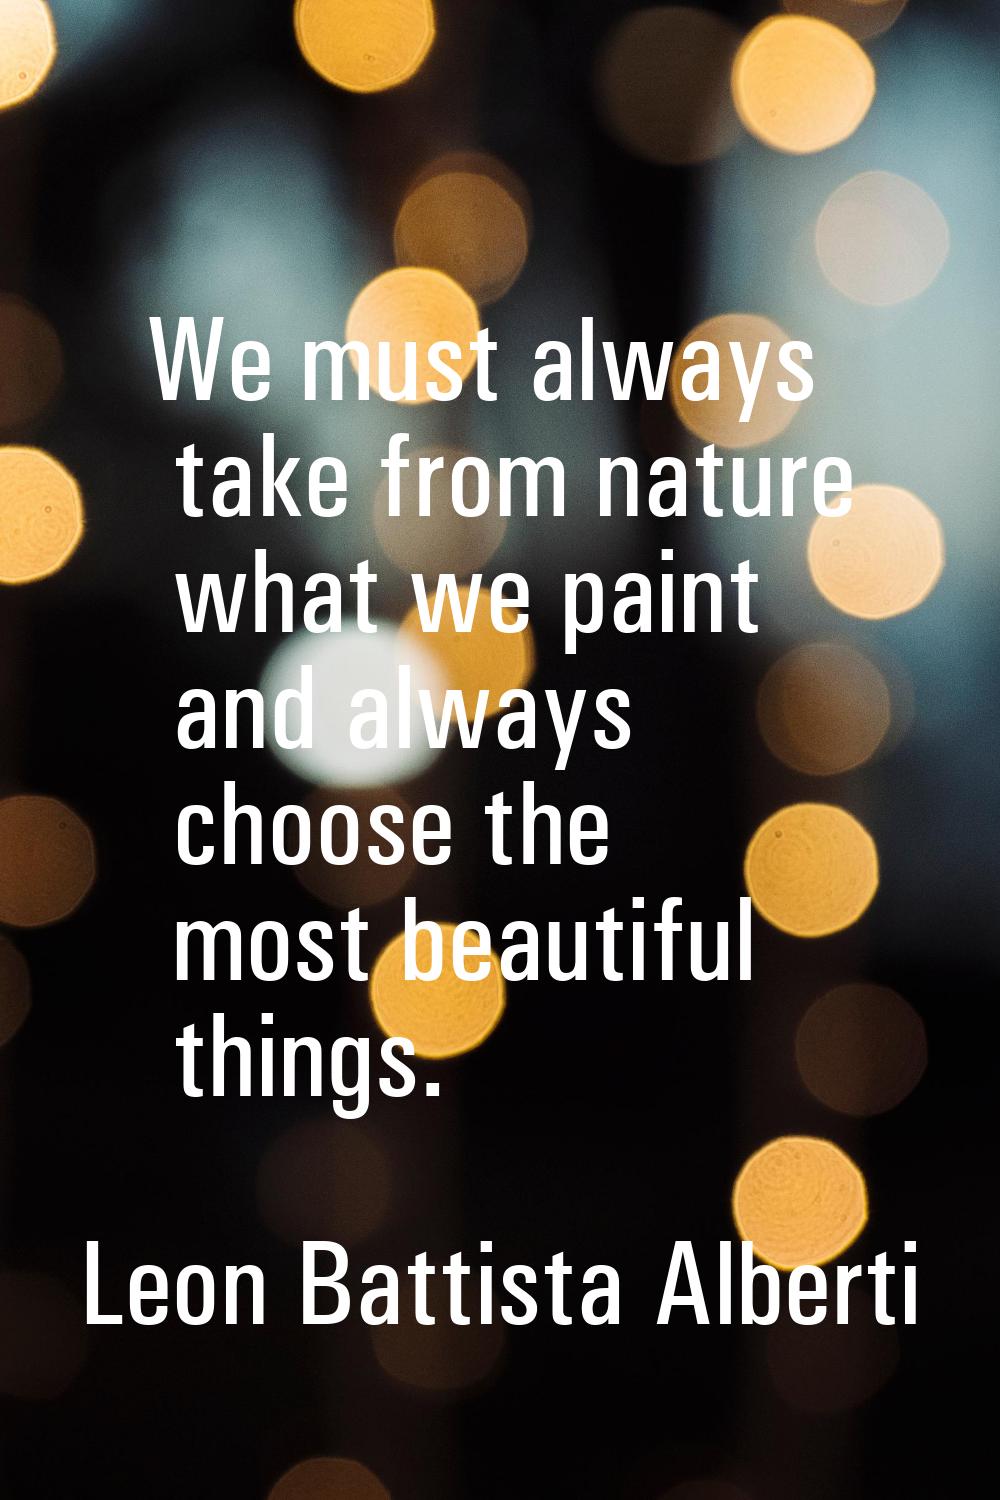 We must always take from nature what we paint and always choose the most beautiful things.